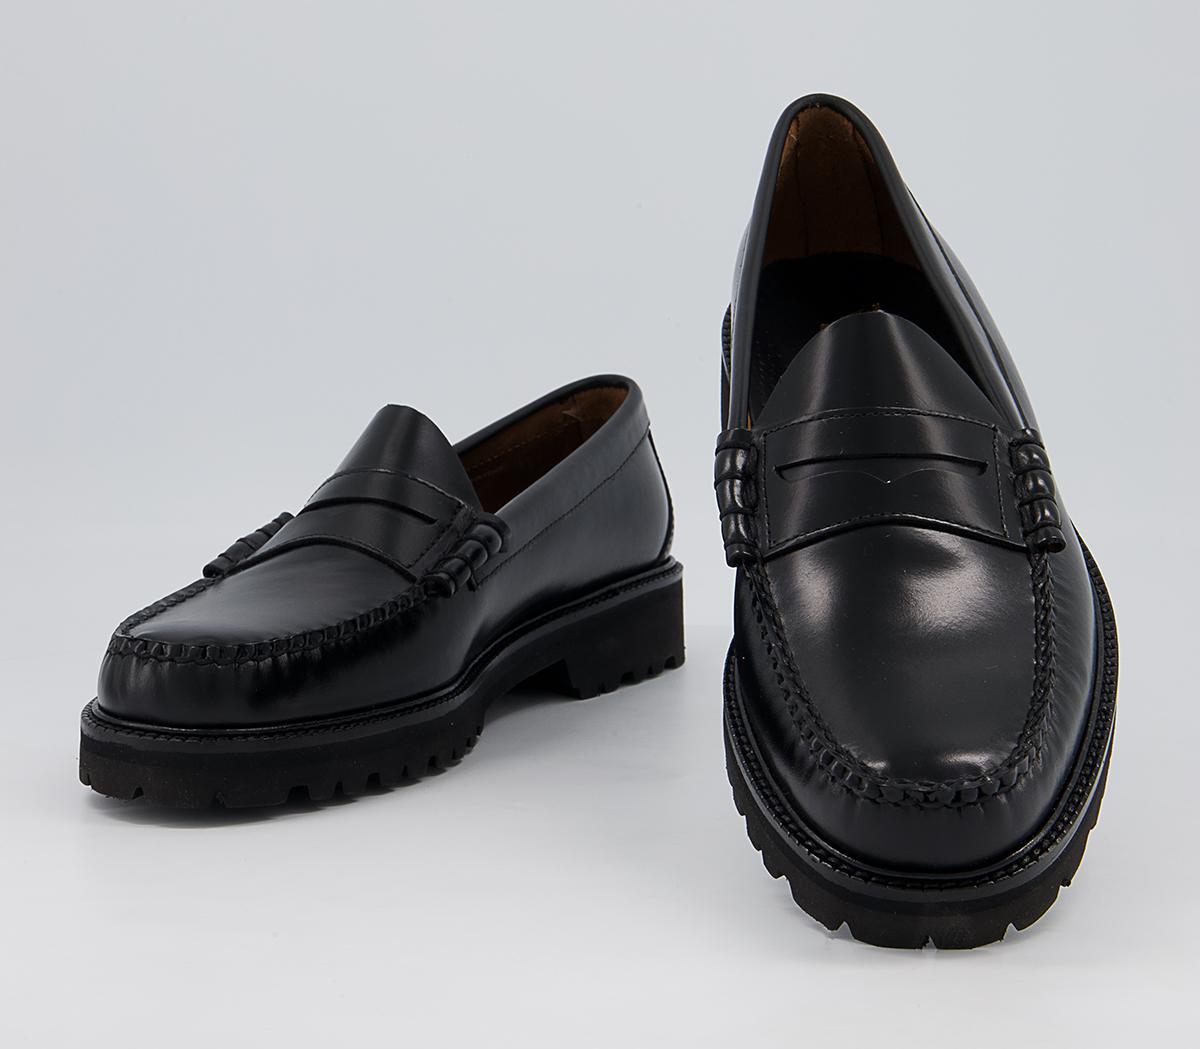 G.H Bass & Co Weejun 90 Larson Penny Loafers Black Leather - Men’s ...